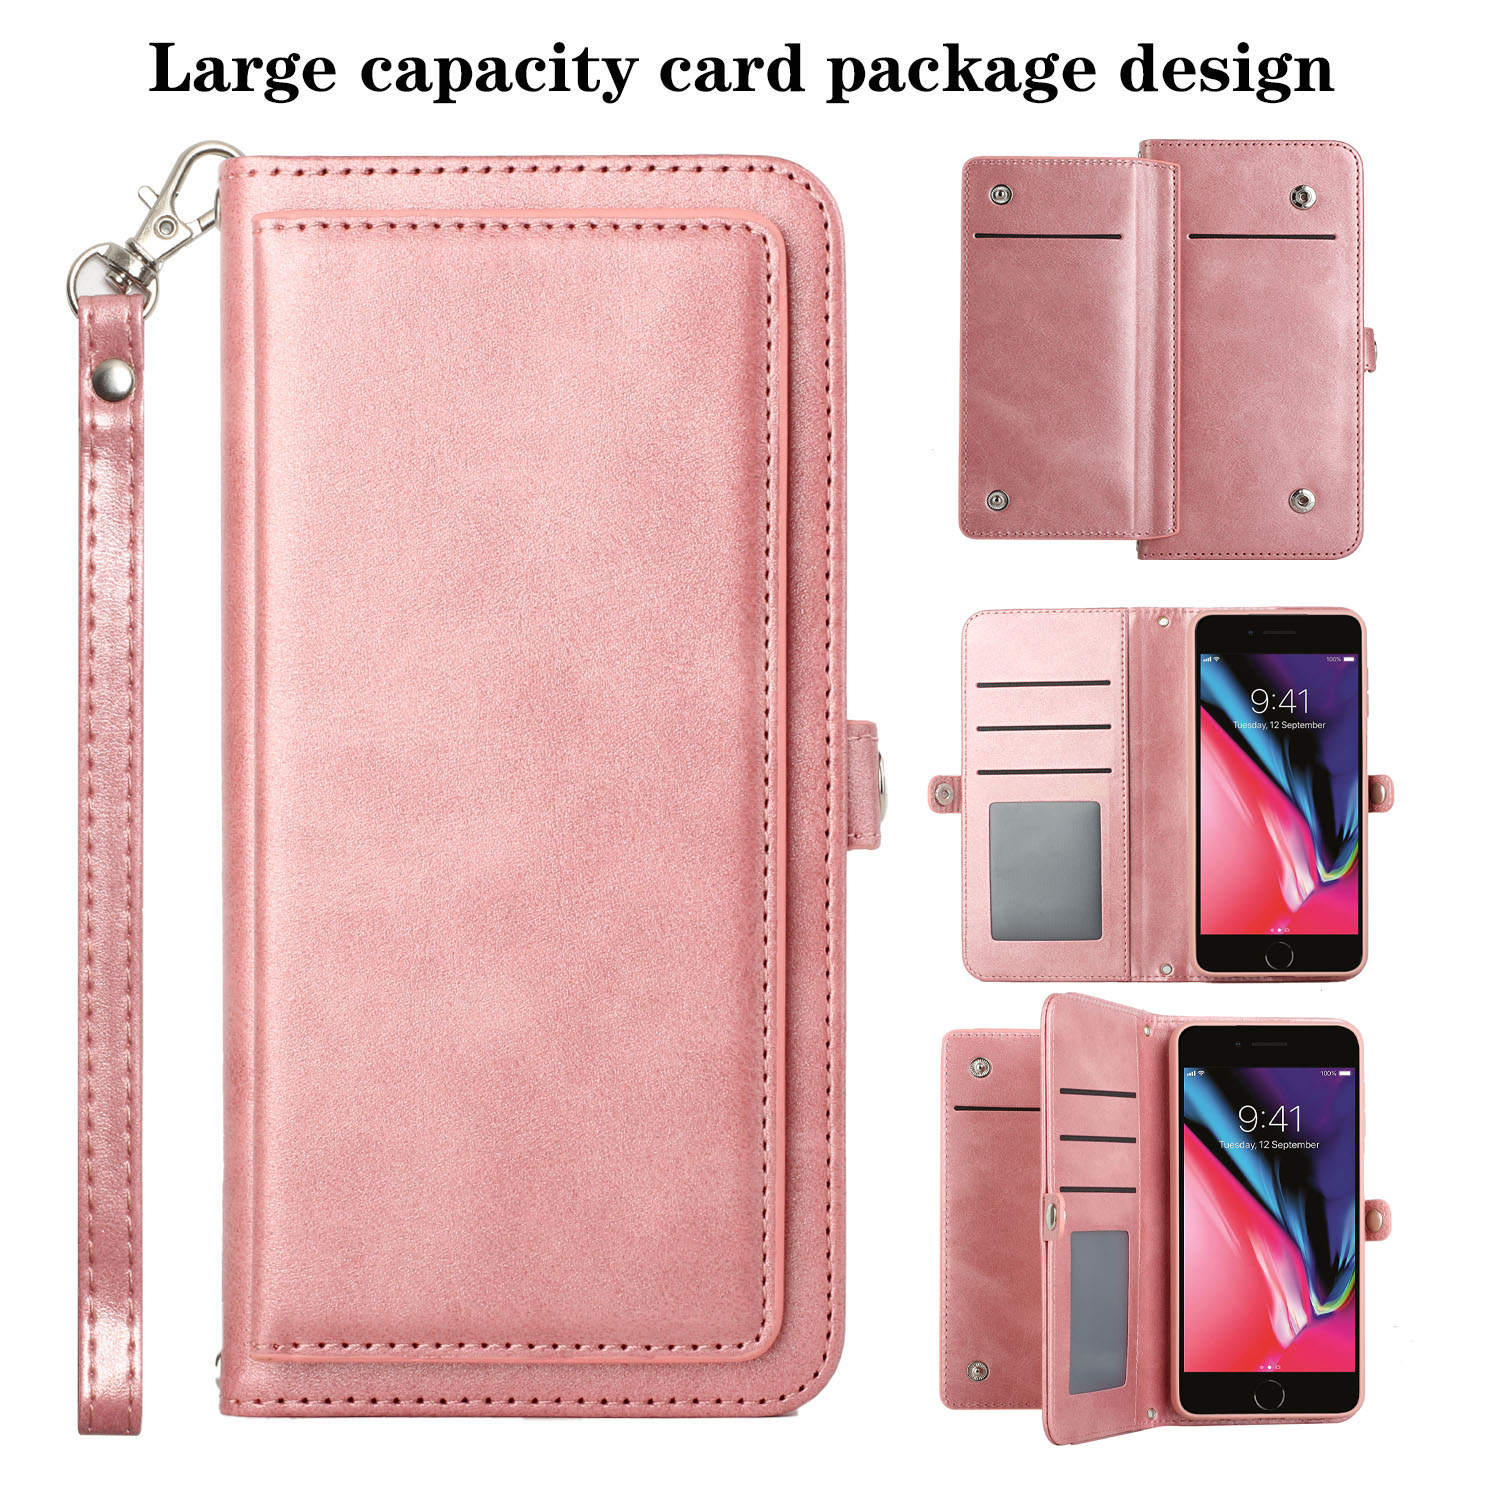 Premium PU Leather Folio Wallet Front Cover Case with Card Holder Slots and Wrist Strap for Apple